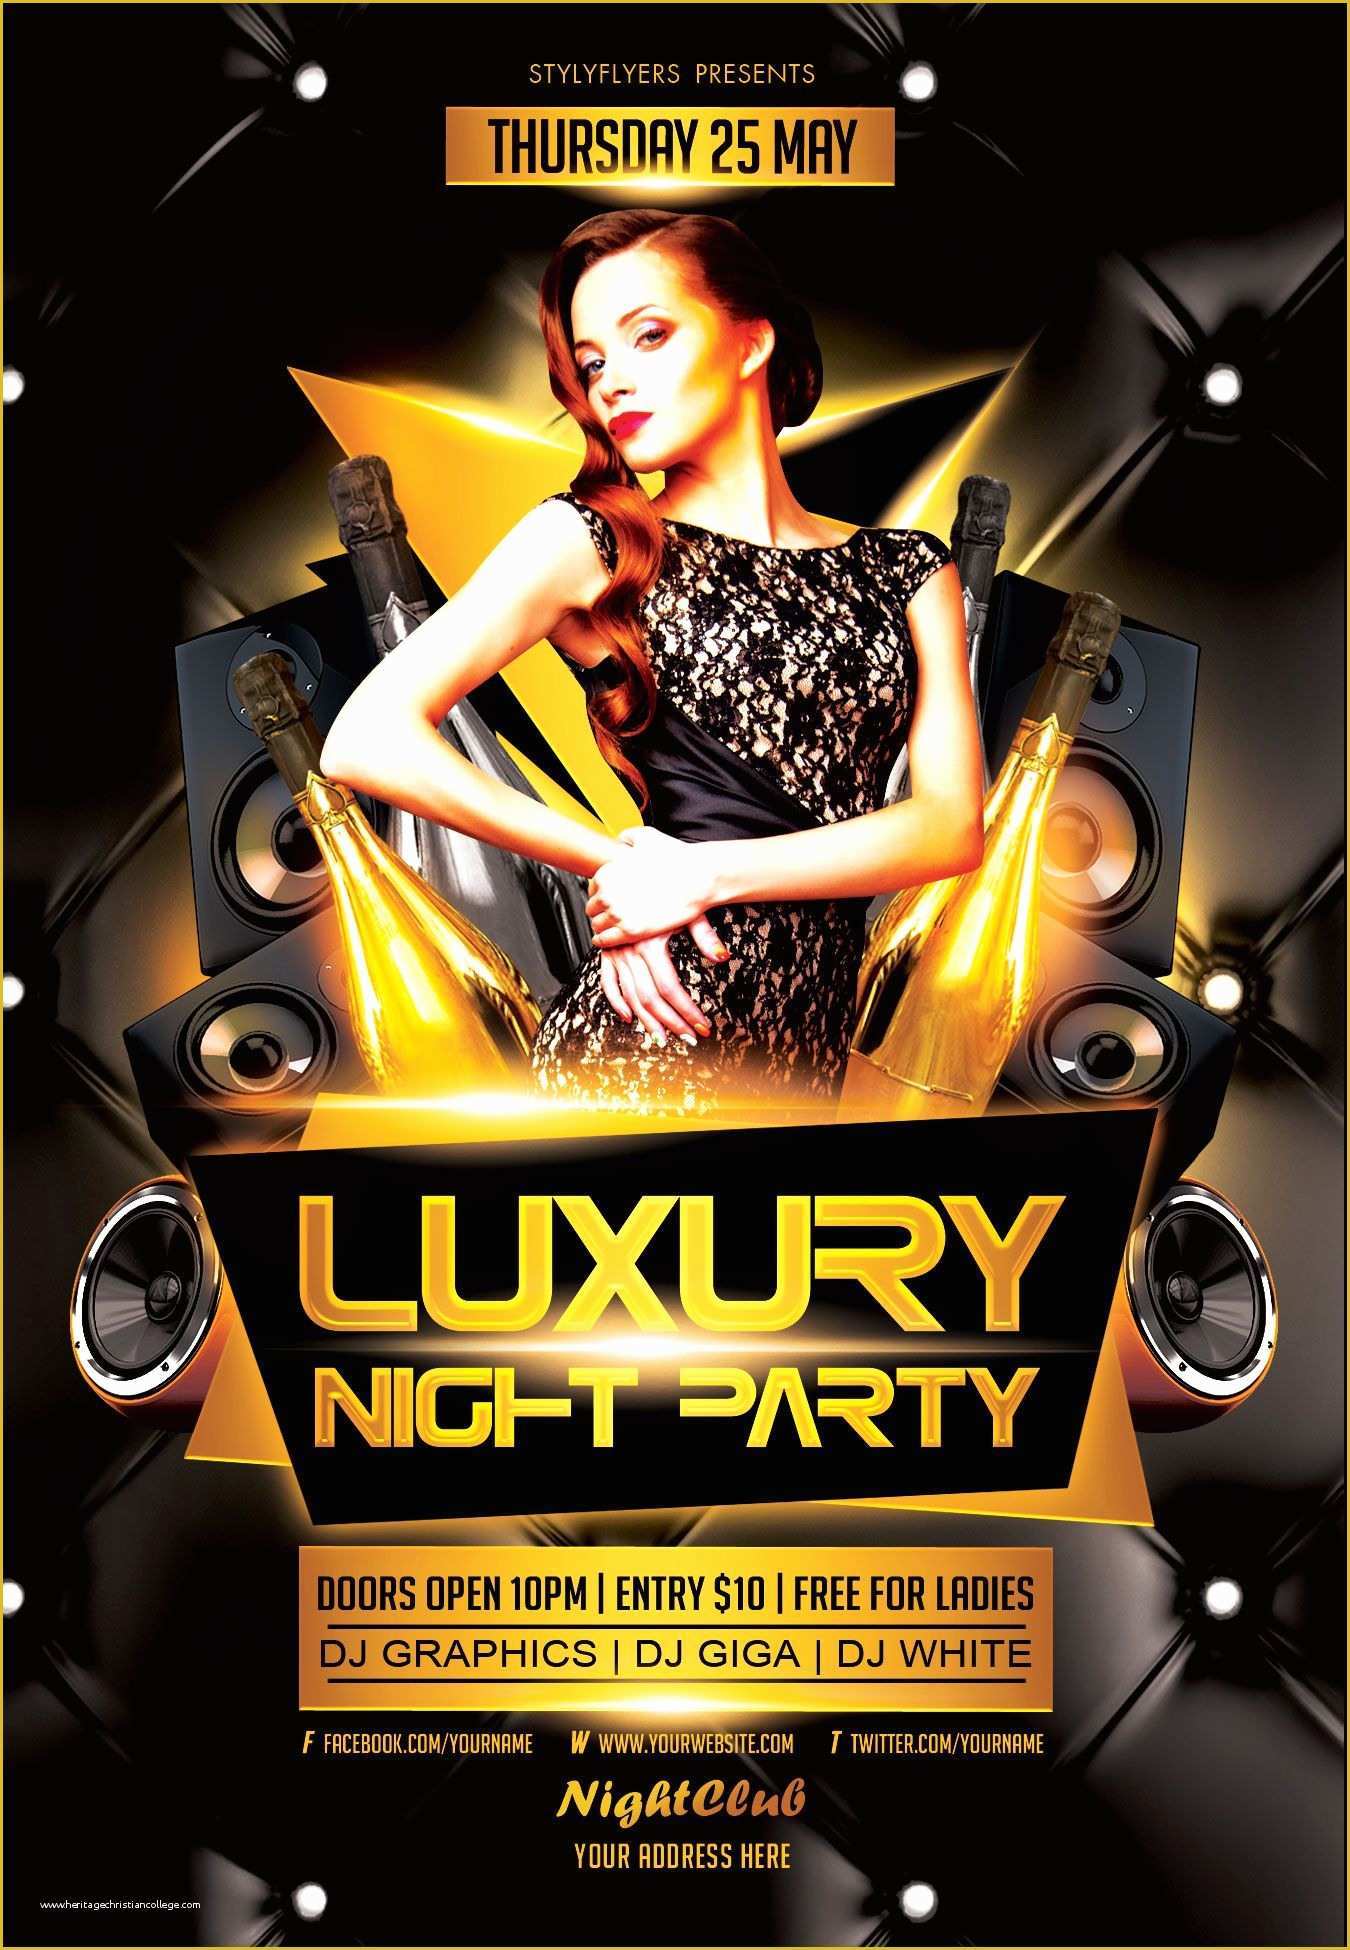 Free Birthday Flyer Templates Of Free Luxury Night Party Flyer Psd Template by Styleflyer